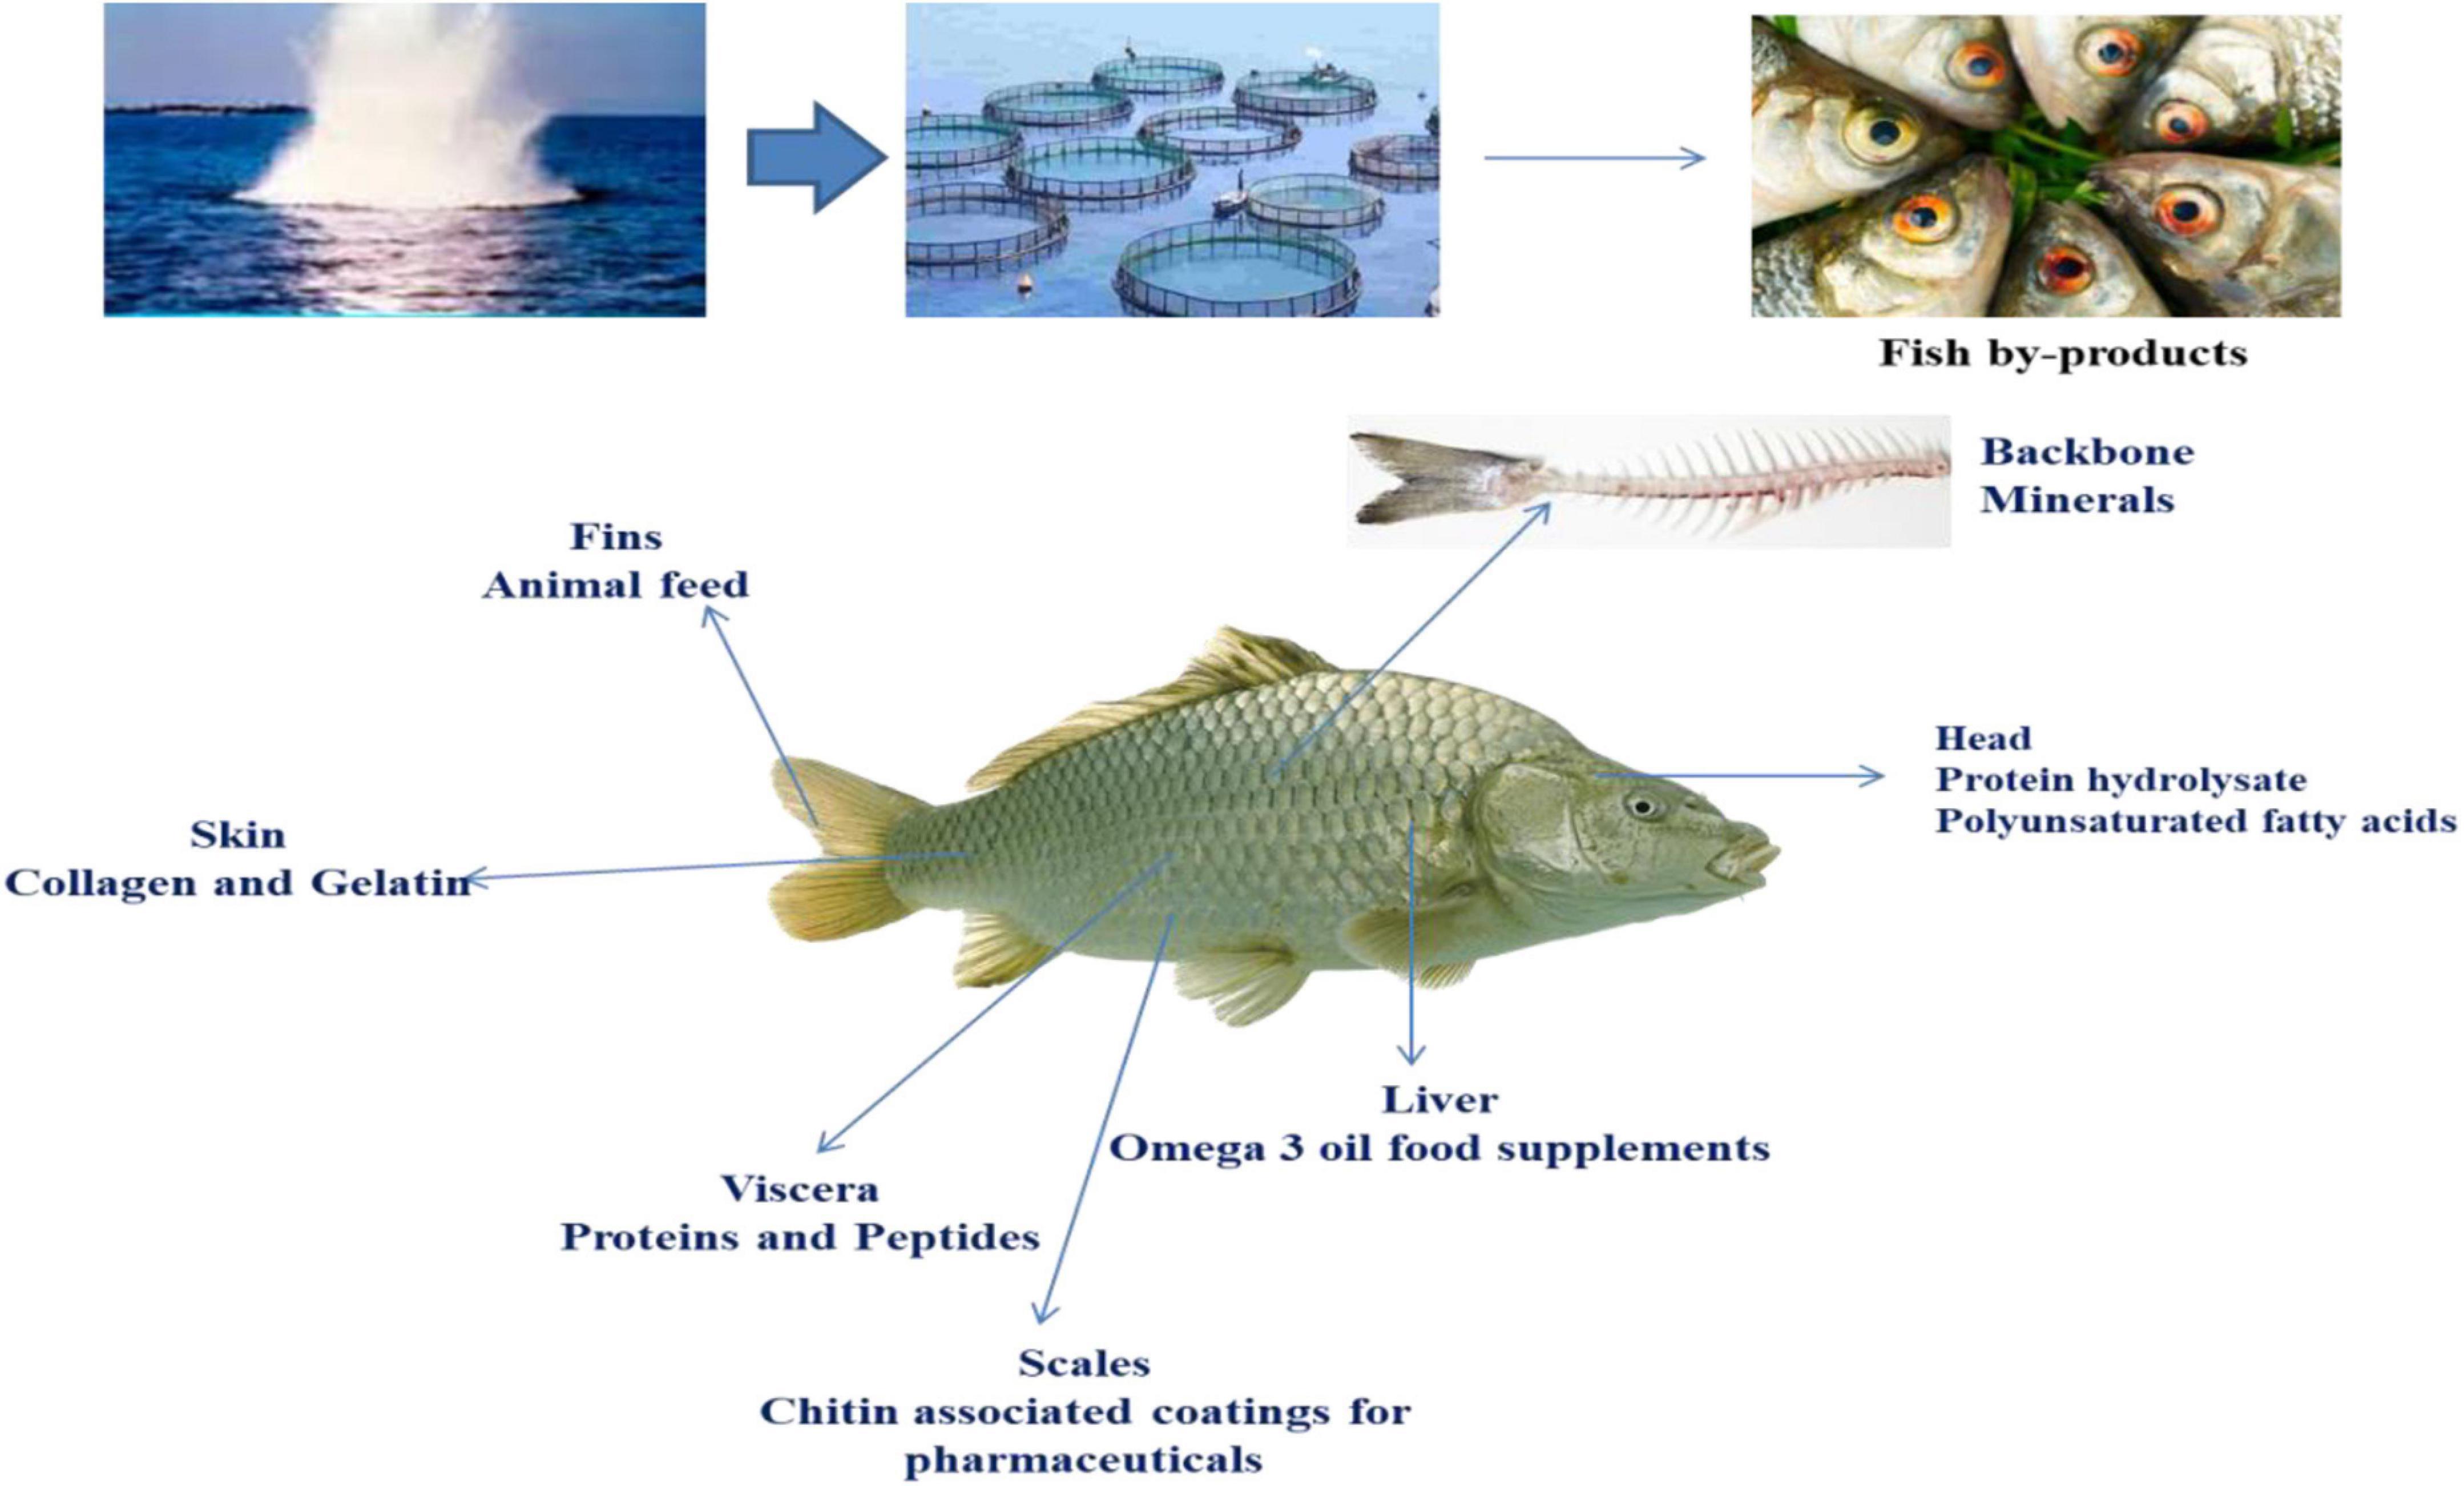 Frontiers  Seafood Discards: A Potent Source of Enzymes and  Biomacromolecules With Nutritional and Nutraceutical Significance